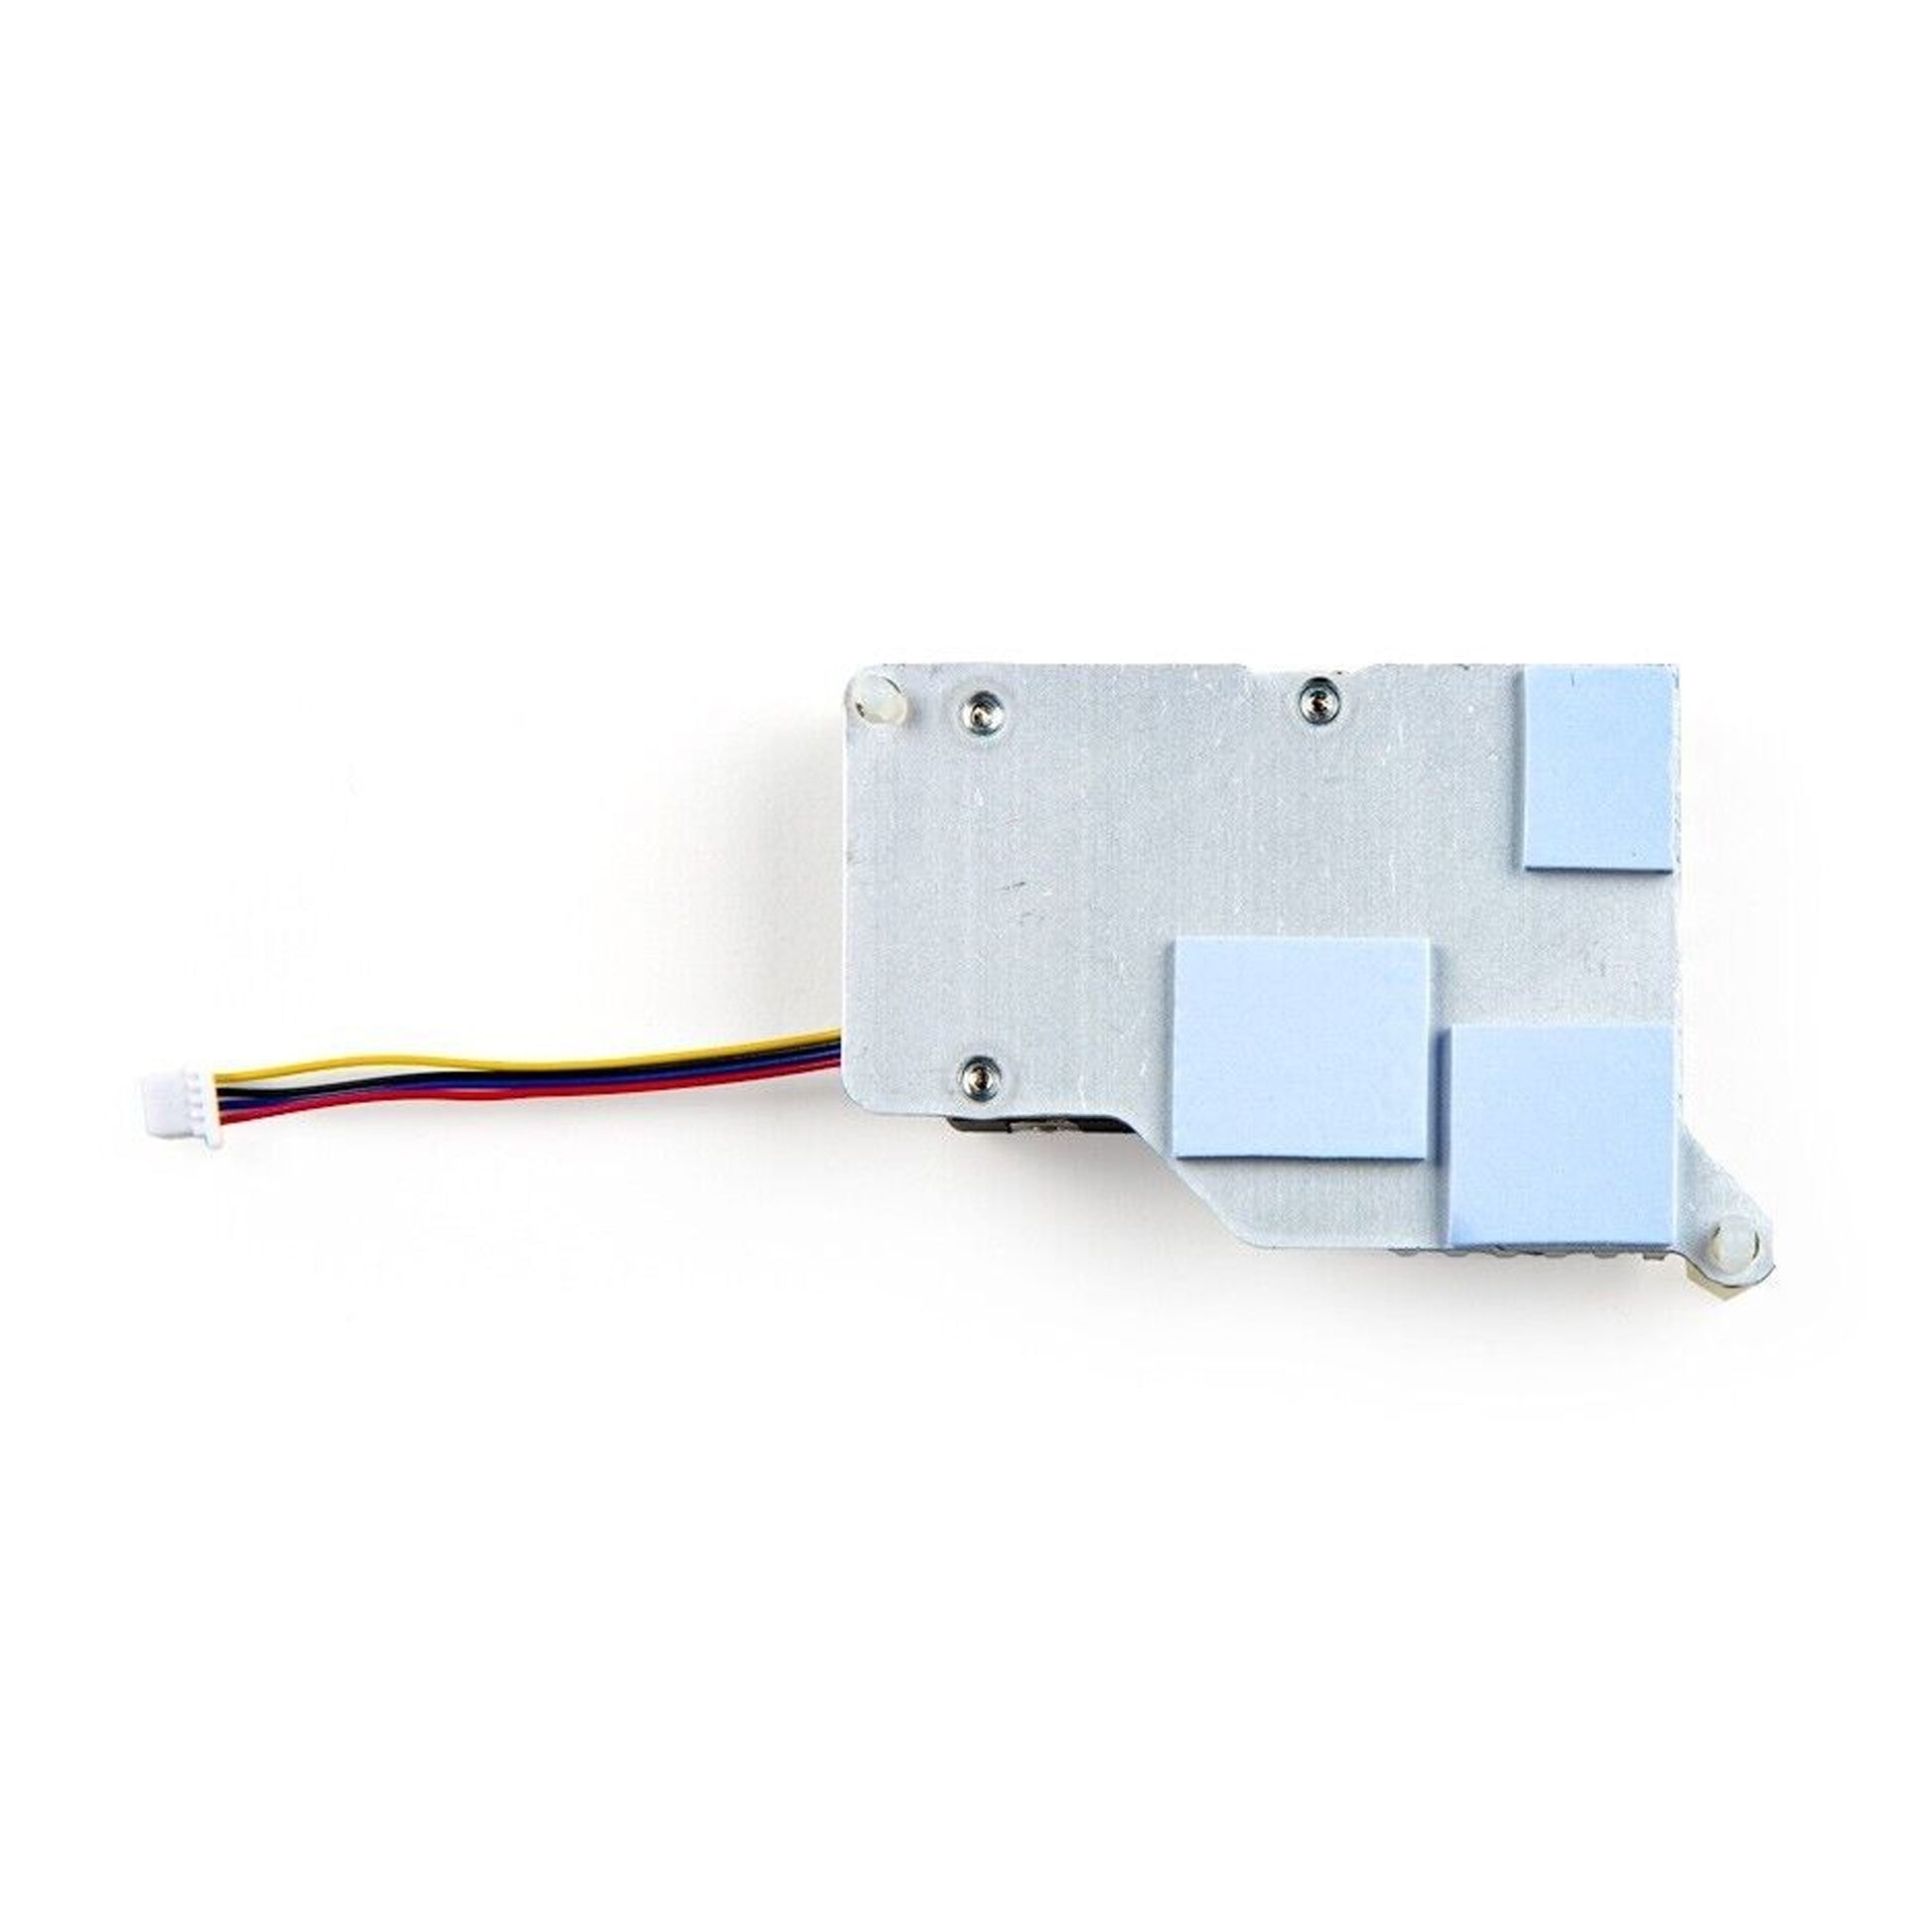 Official Raspberry Pi 5 Active Cooler, Temperature-controlled Blower Fan, Aluminium Heatsink for Raspberry Pi 5 2GB, 4GB, and 8GB - RS5789 - REES52